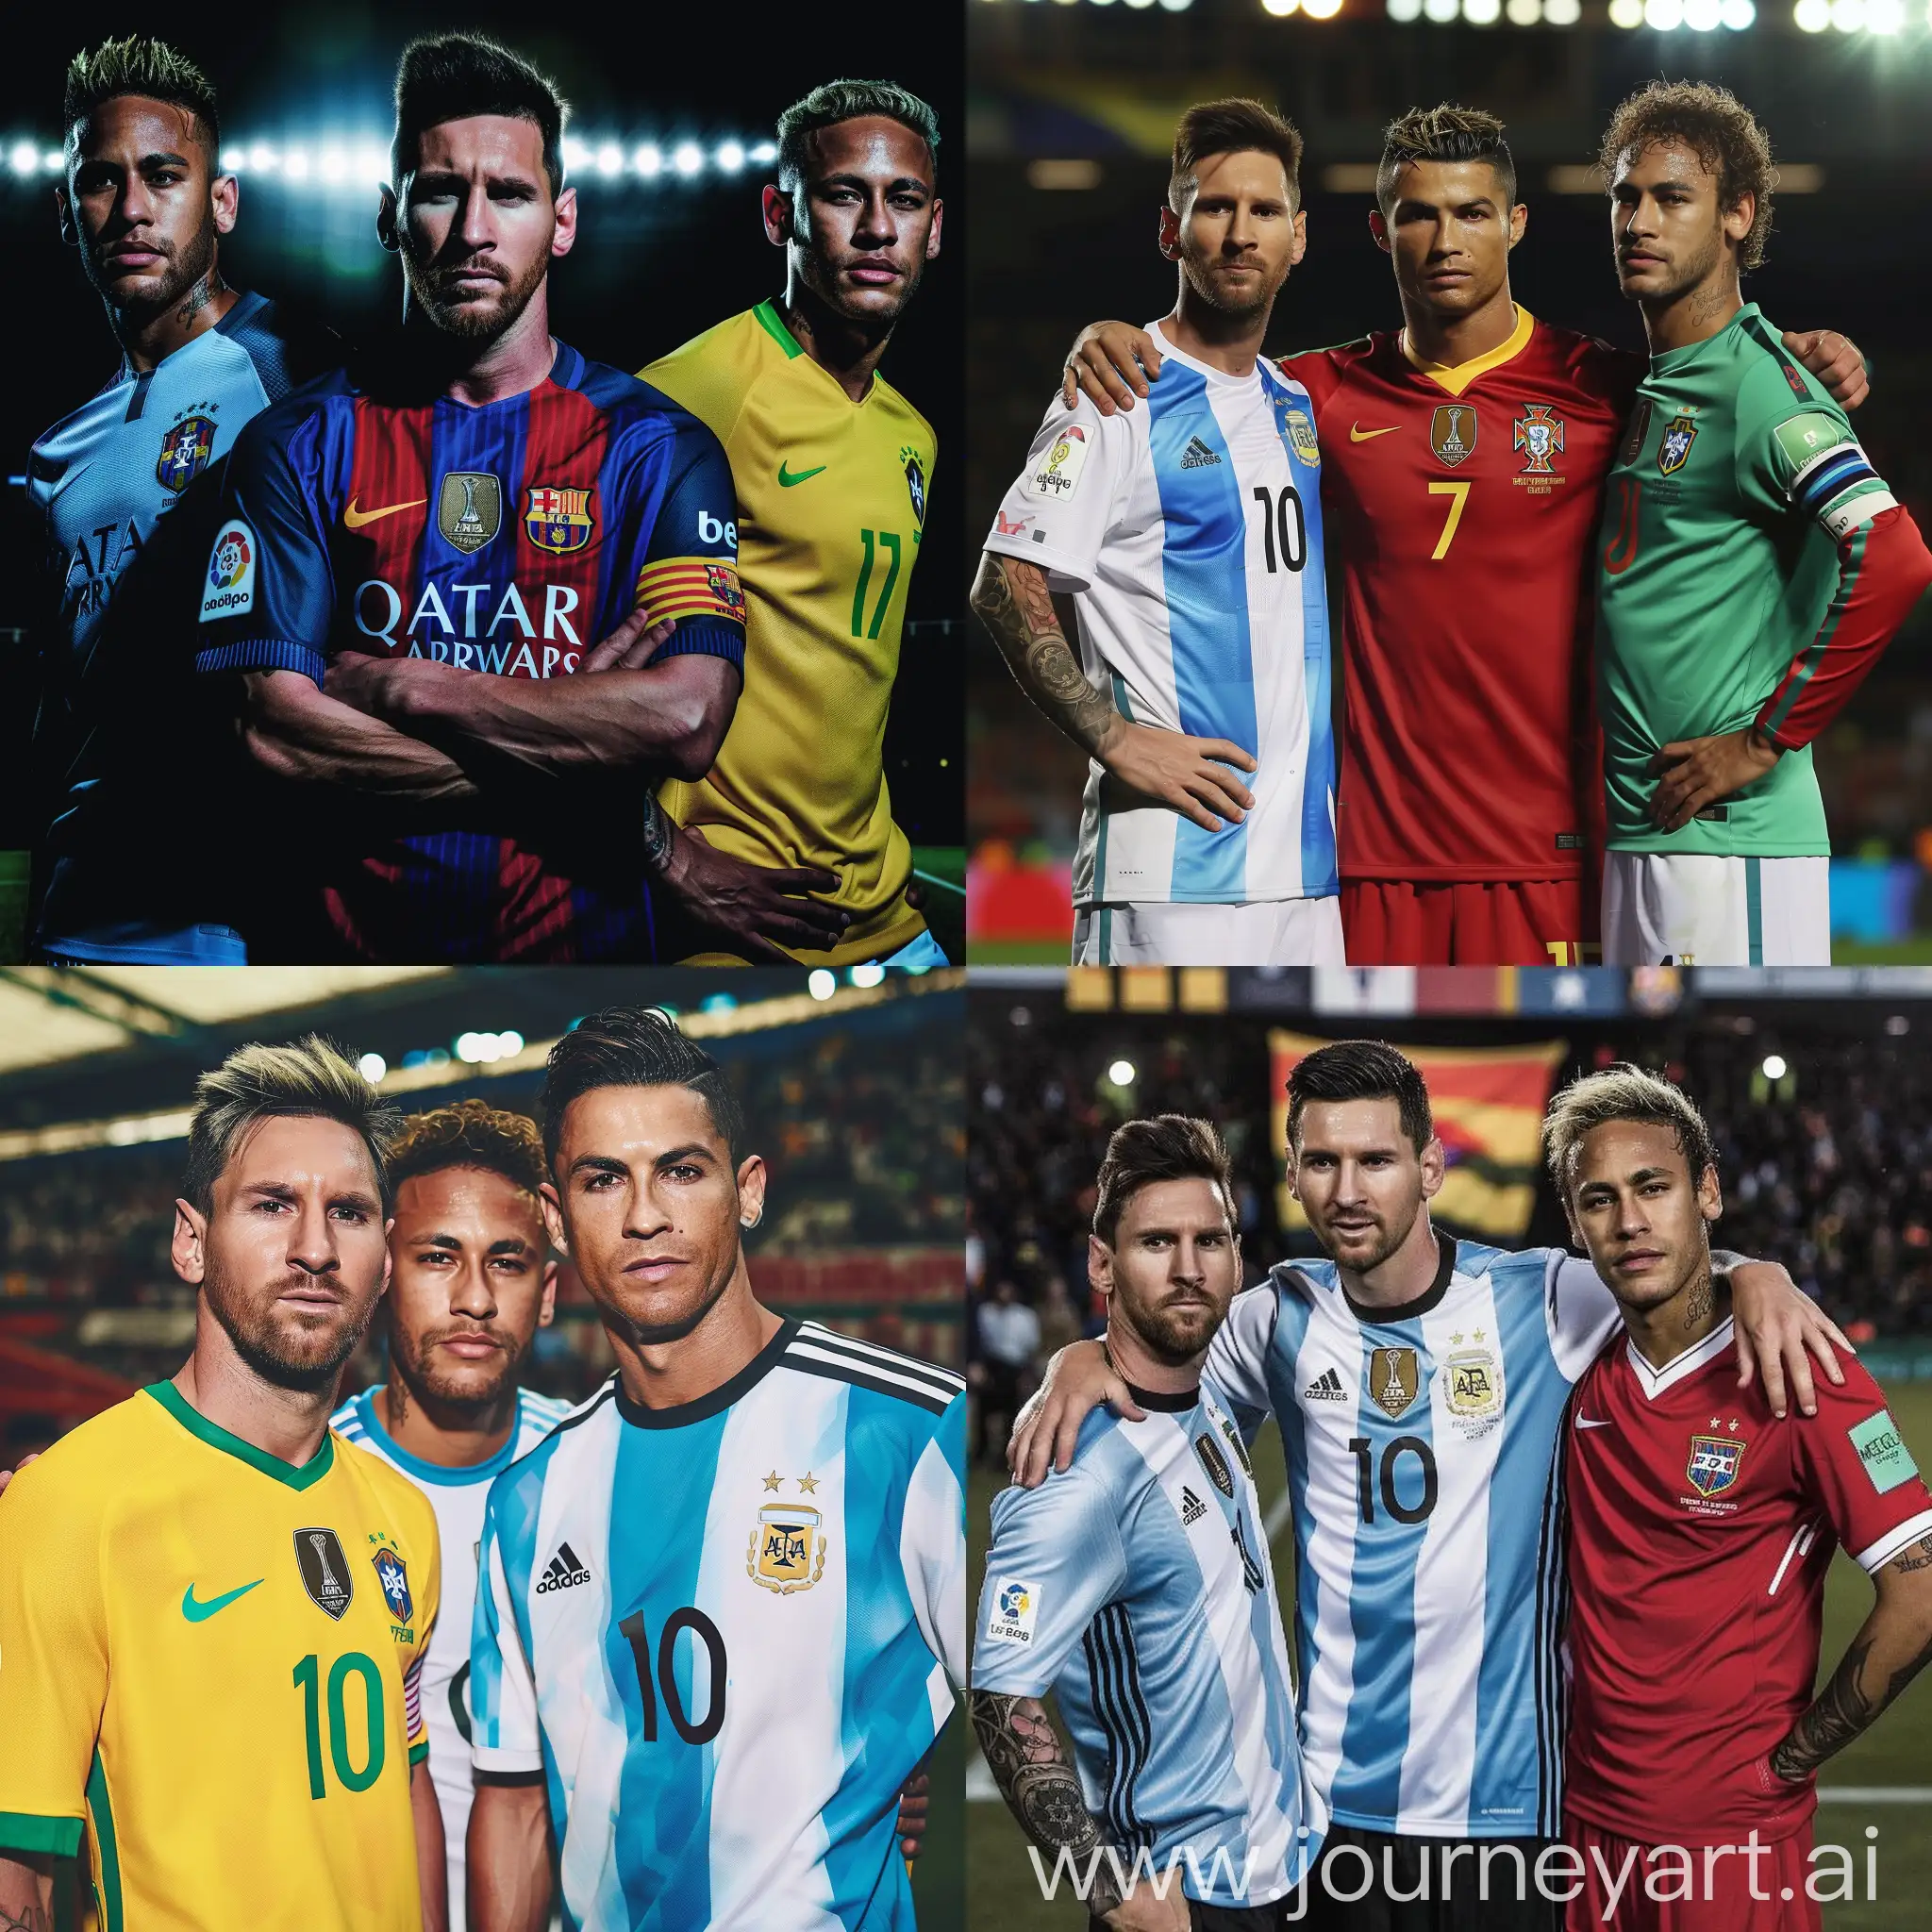 A picture from messi and ronaldo and neymar in national team kit